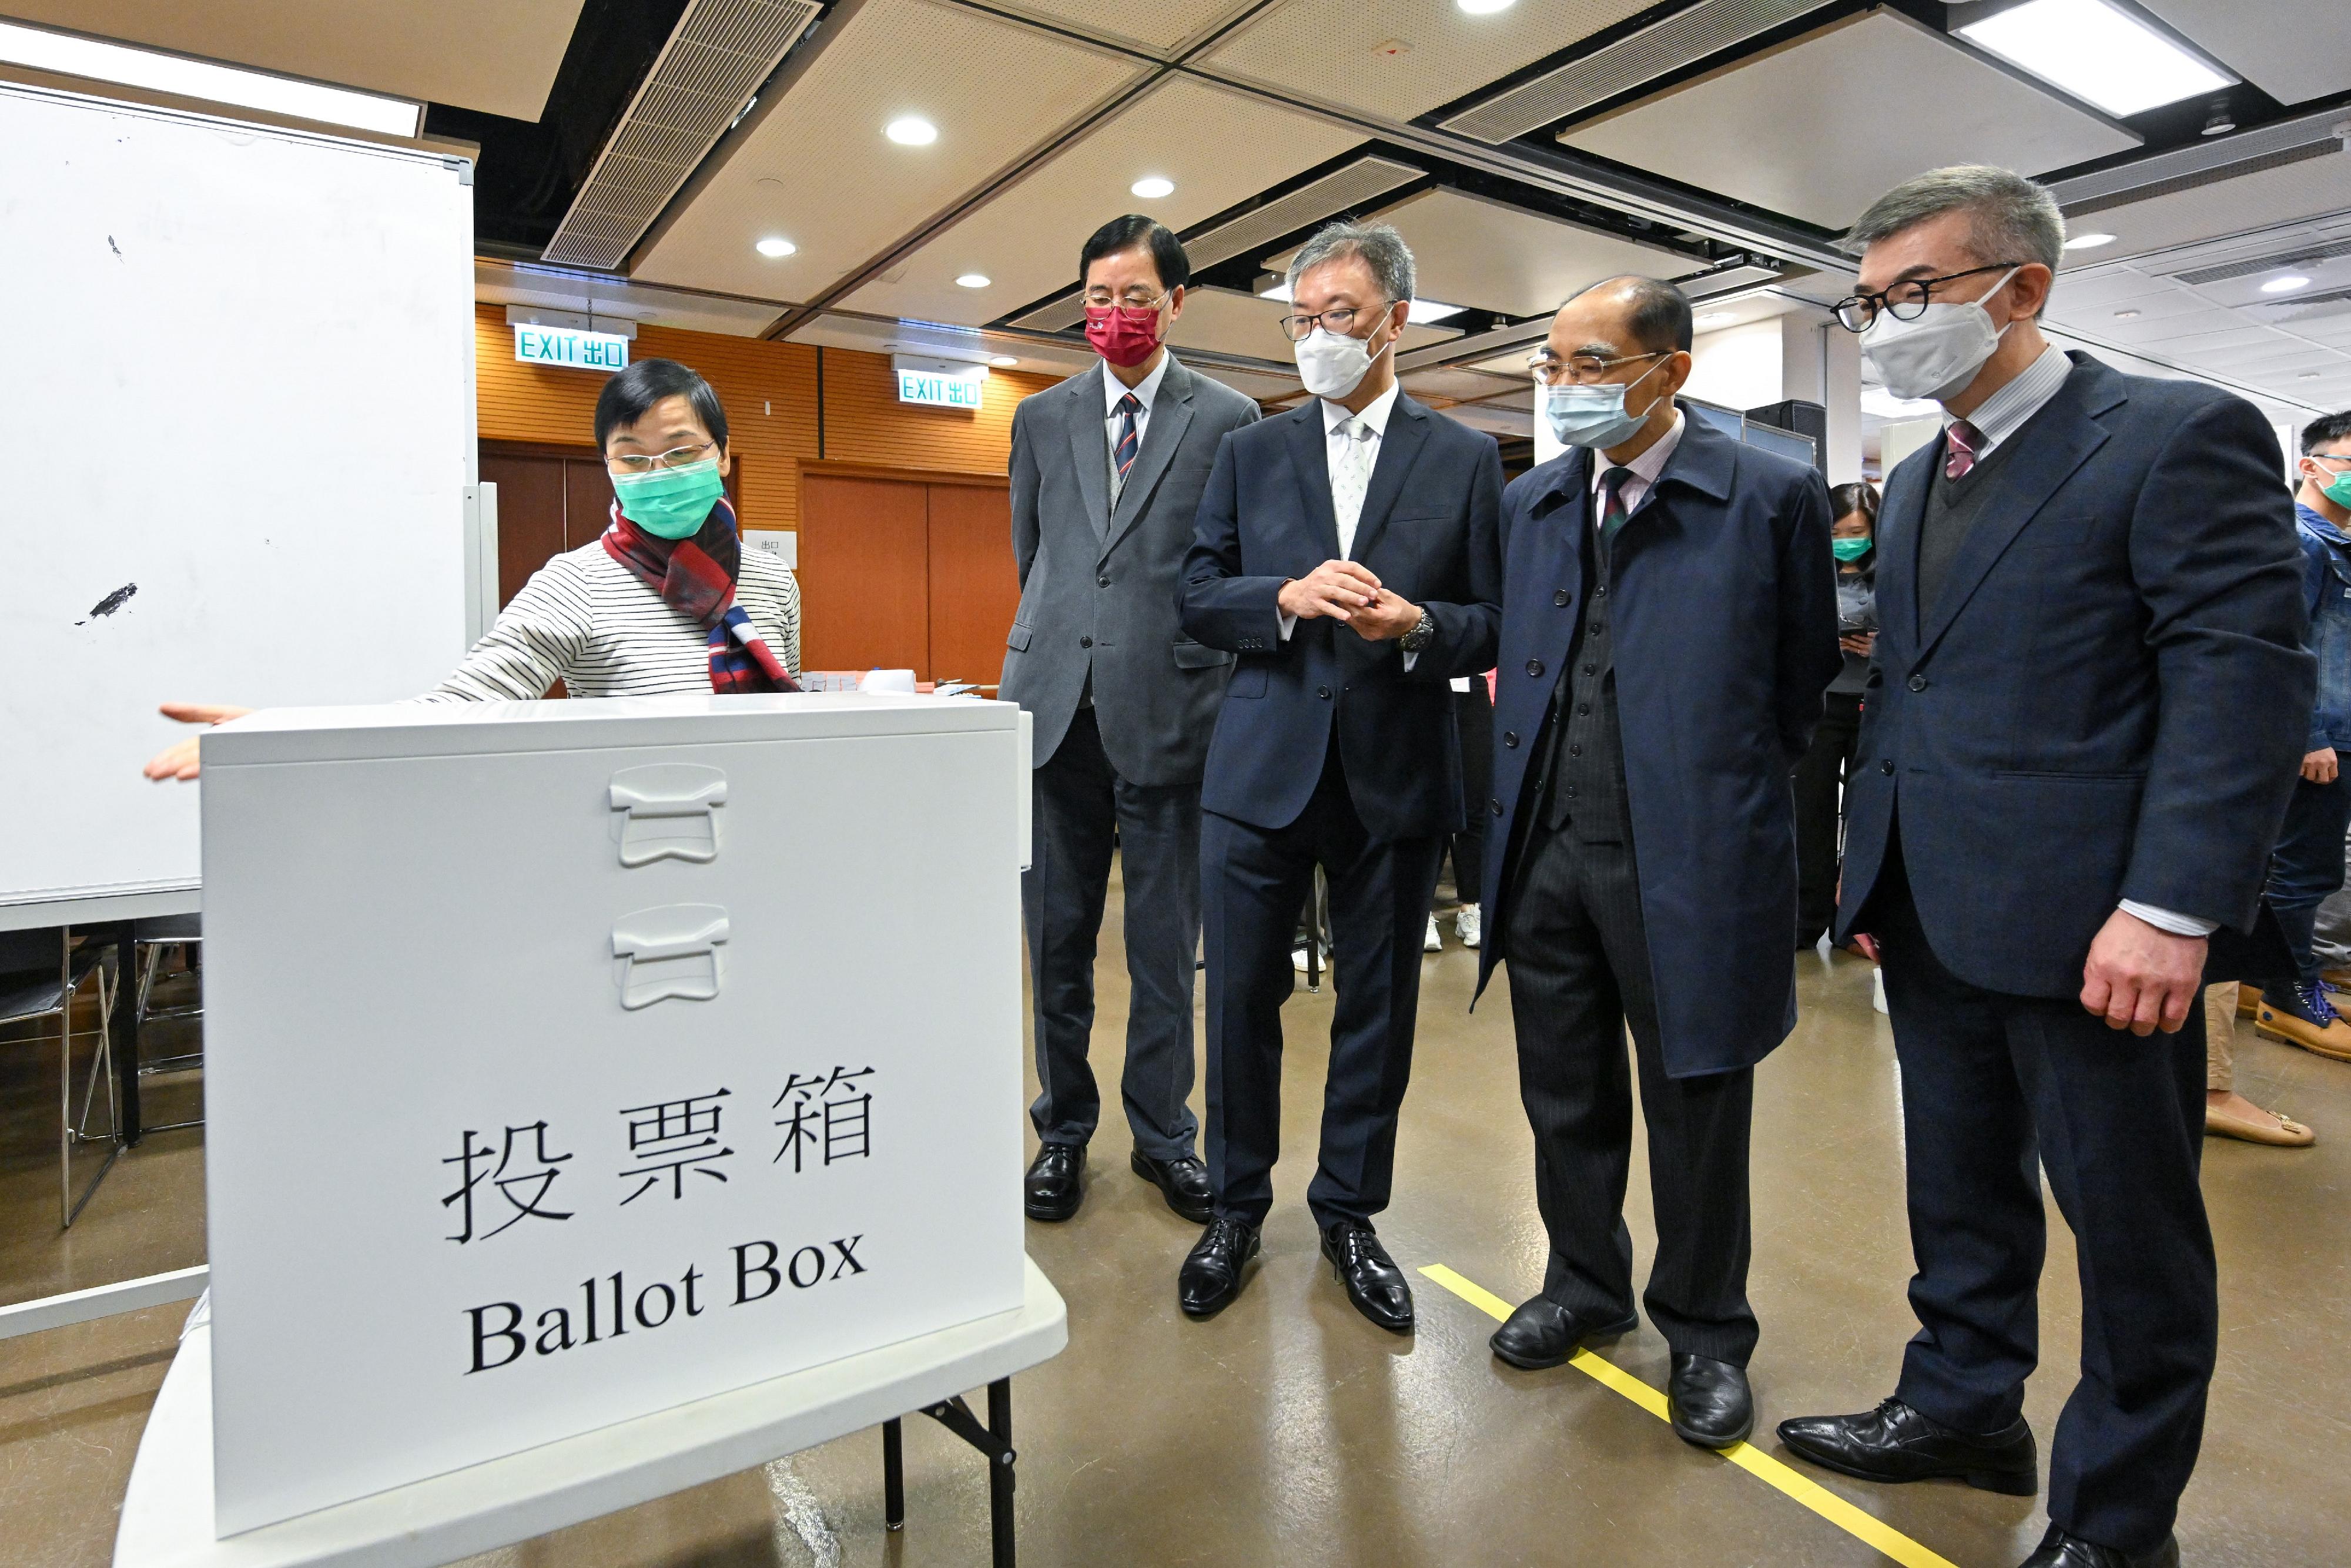 The Chairman of the Electoral Affairs Commission (EAC), Mr Justice David Lok (third right), EAC members Mr Arthur Luk, SC (second right), and Professor Daniel Shek (fourth right) today (December 8) inspected a hands-on training session organised by the Registration and Electoral Office (REO) provided to polling staff of the 2022 Legislative Council Election Committee constituency by-election. Also present was the Chief Electoral Officer of the REO, Mr Raymond Wang (first right).